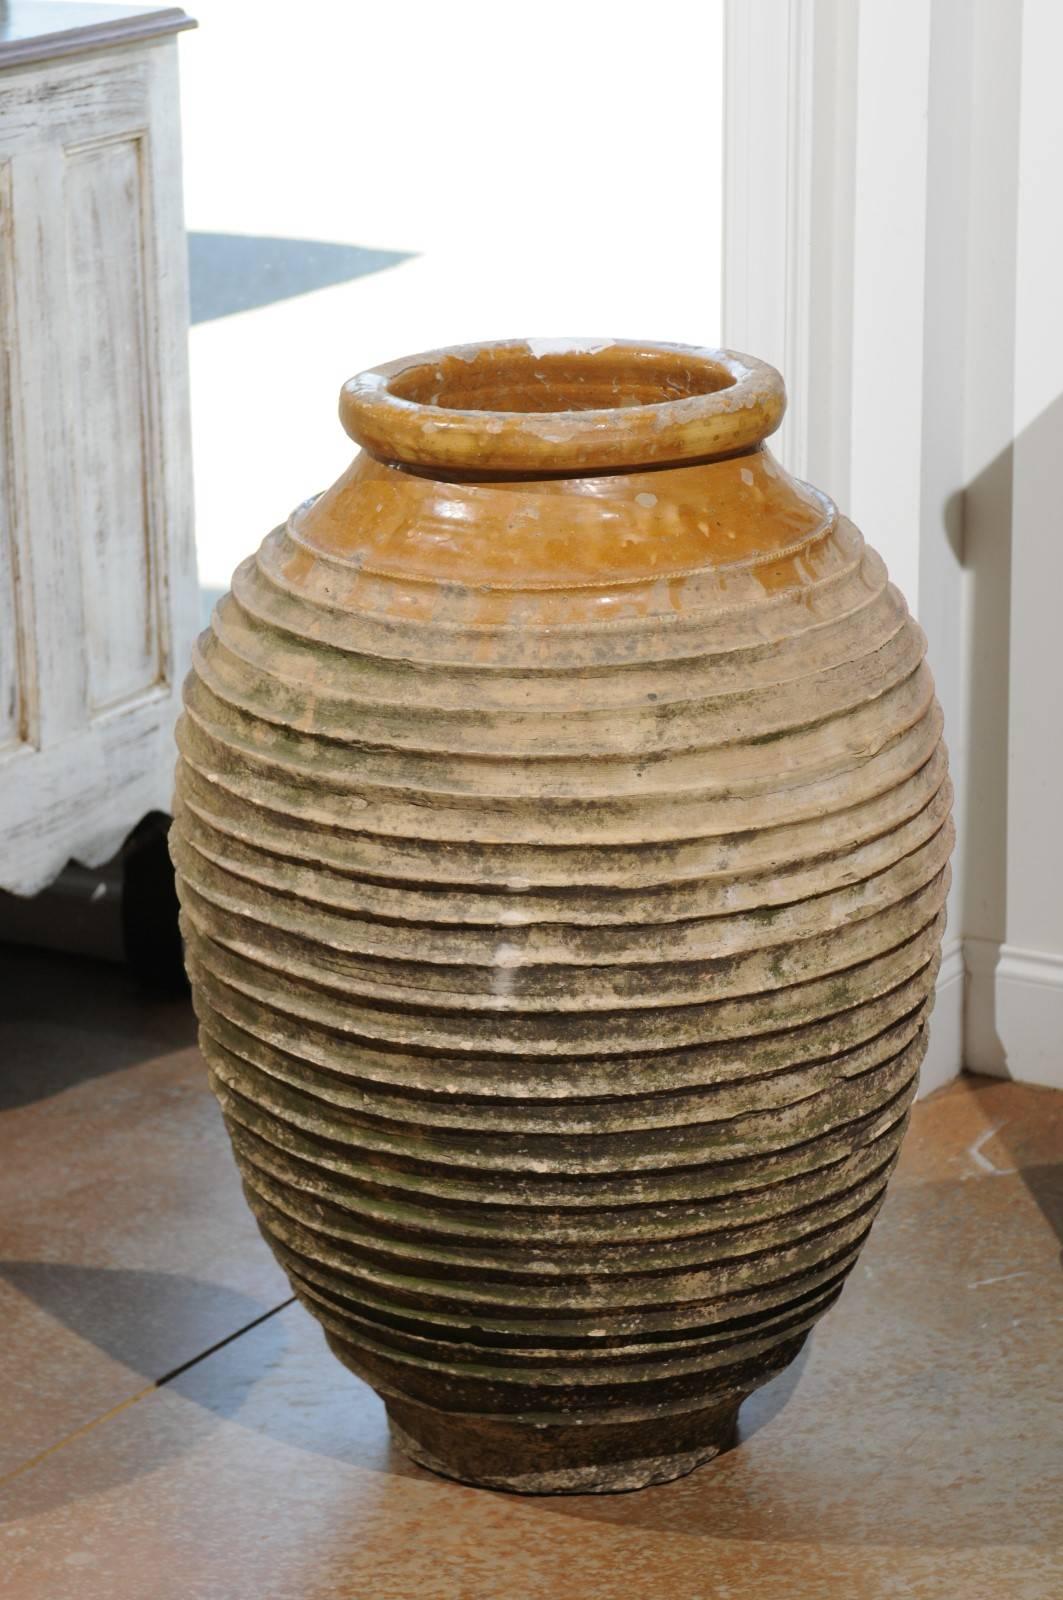 An early 19th century Greek medium size terracotta ribbed olive jar with traces of glaze in the upper section. This olive terracotta jar was born in Greece in the early 1800, where it was used to store olive oil. It features a typically Greek style